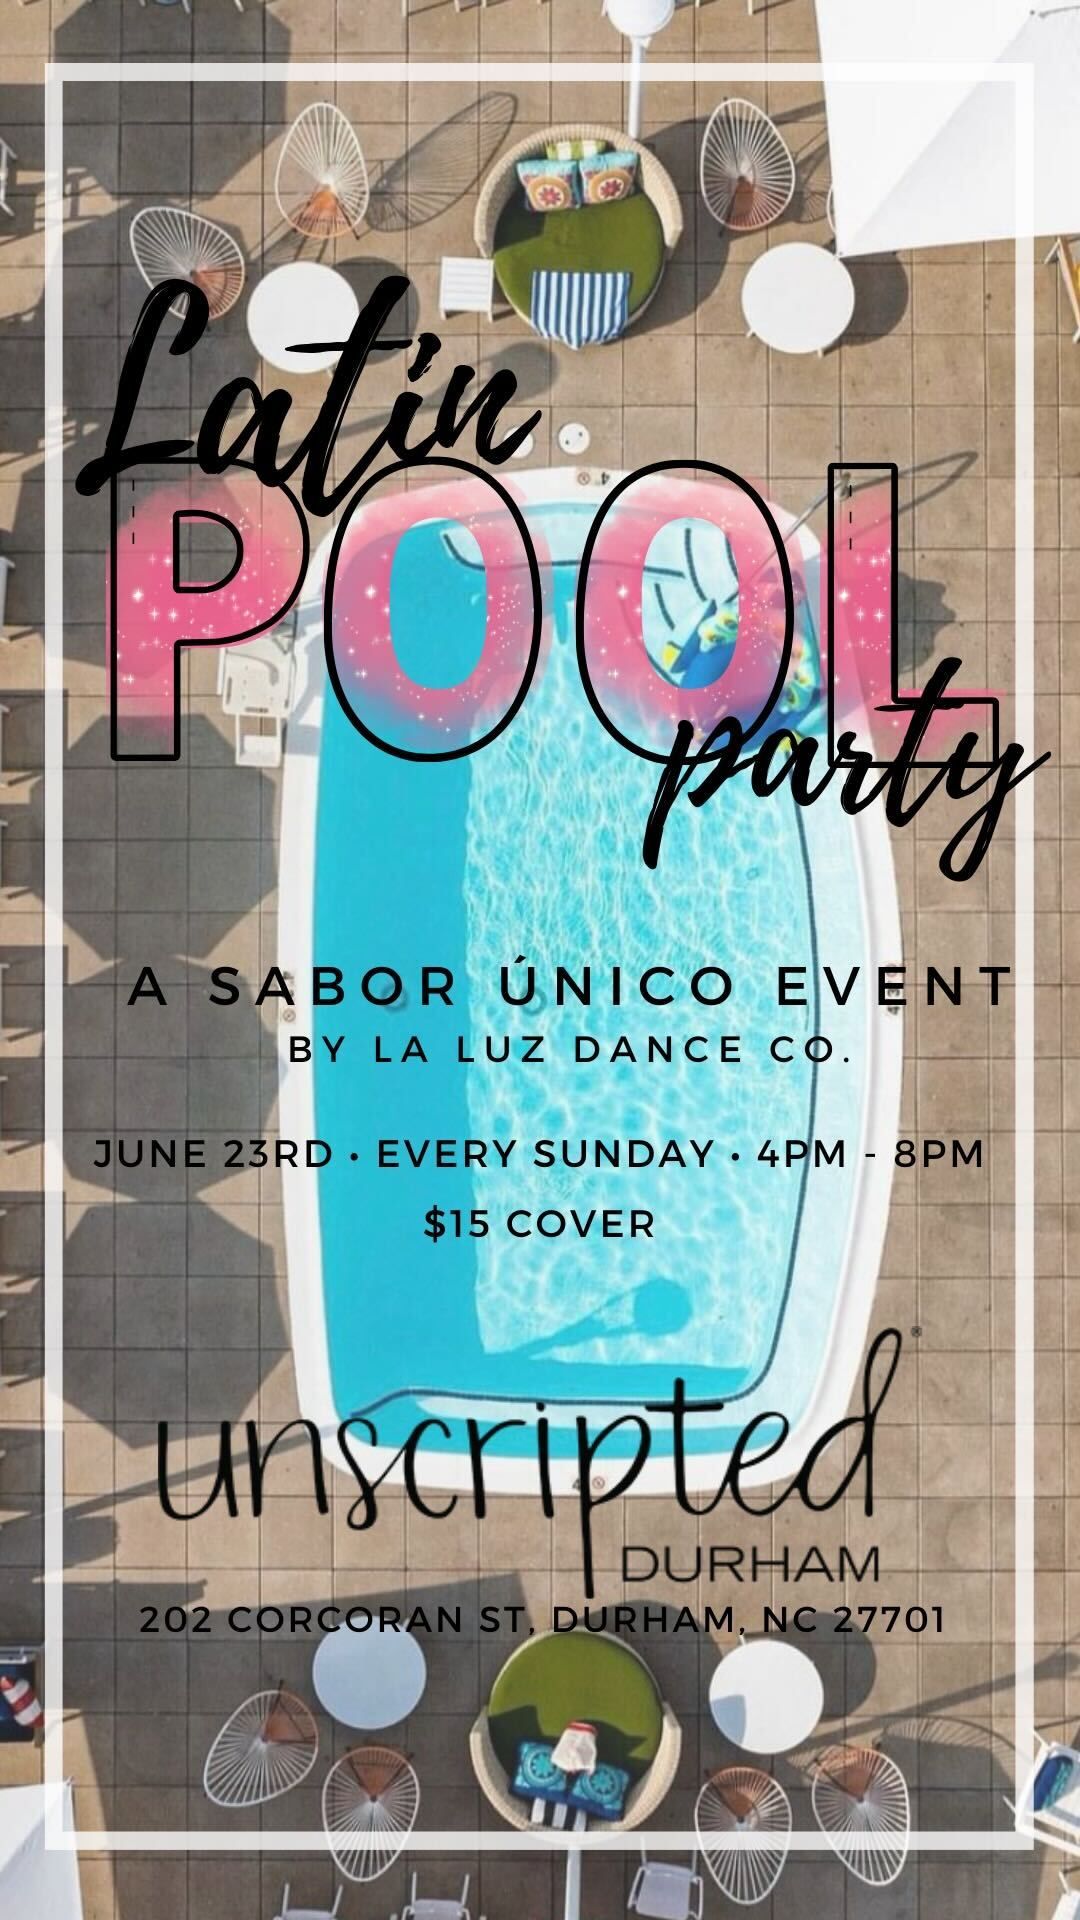 Latin Pool Party - Unscripted Durham 